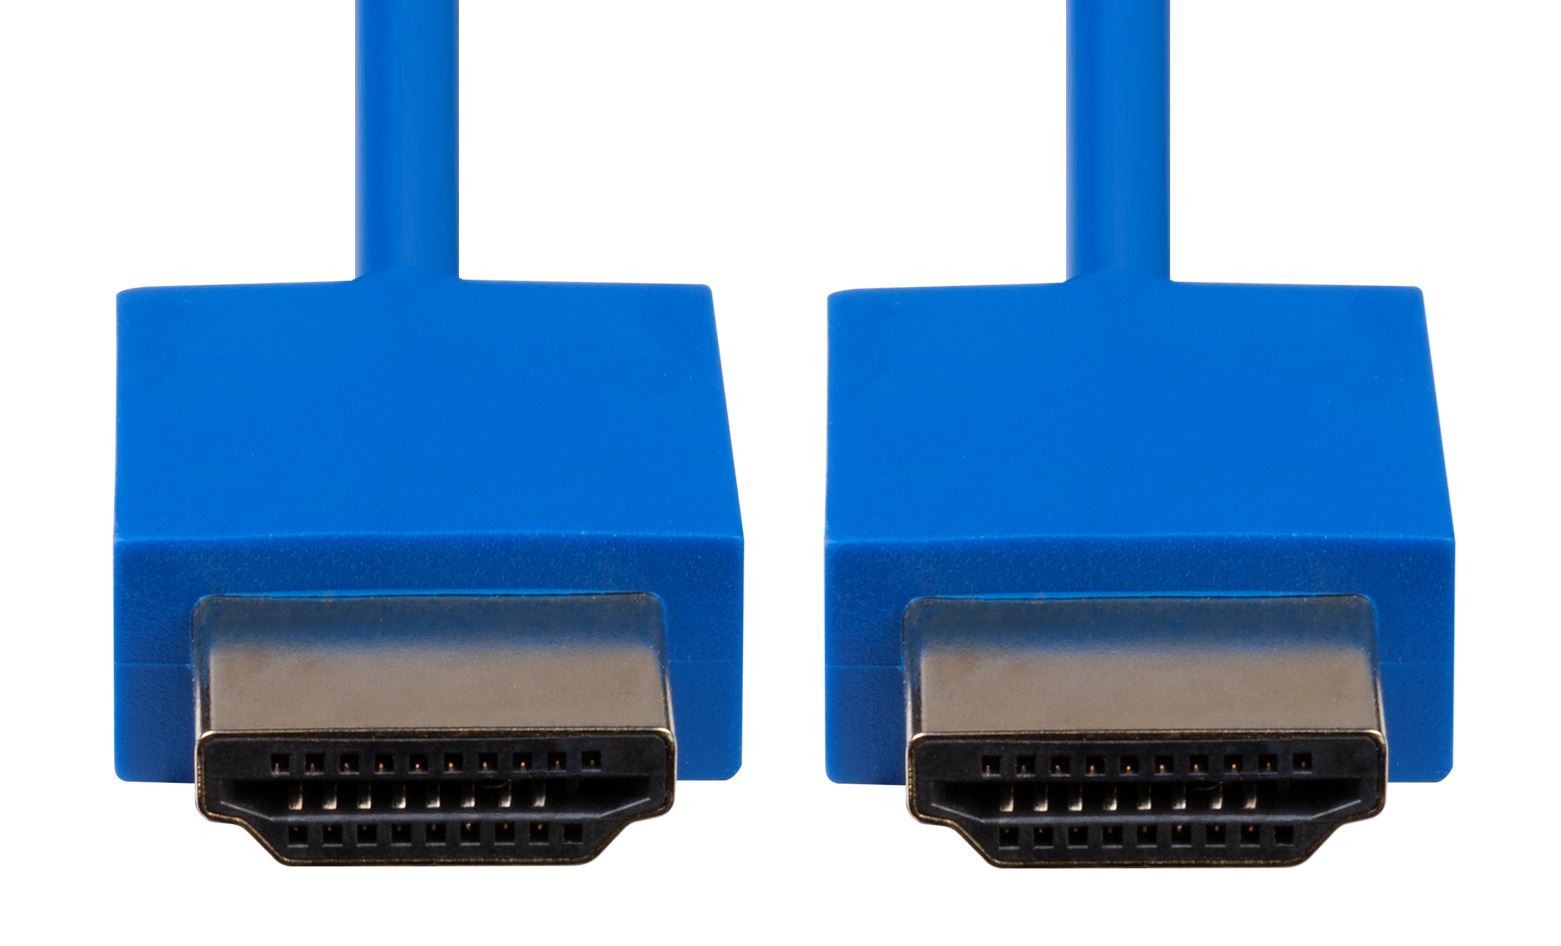 DYNAMIX_0.5M_HDMI_BLUE_Nano_High_Speed_With_Ethernet_Cable._Designed_for_UHD_Display_up_to_4K2K@60Hz._Slimline_Robust_Cable._Supports_CEC_2.0,_3D,_&_ARC._Supports_Up_to_32 688